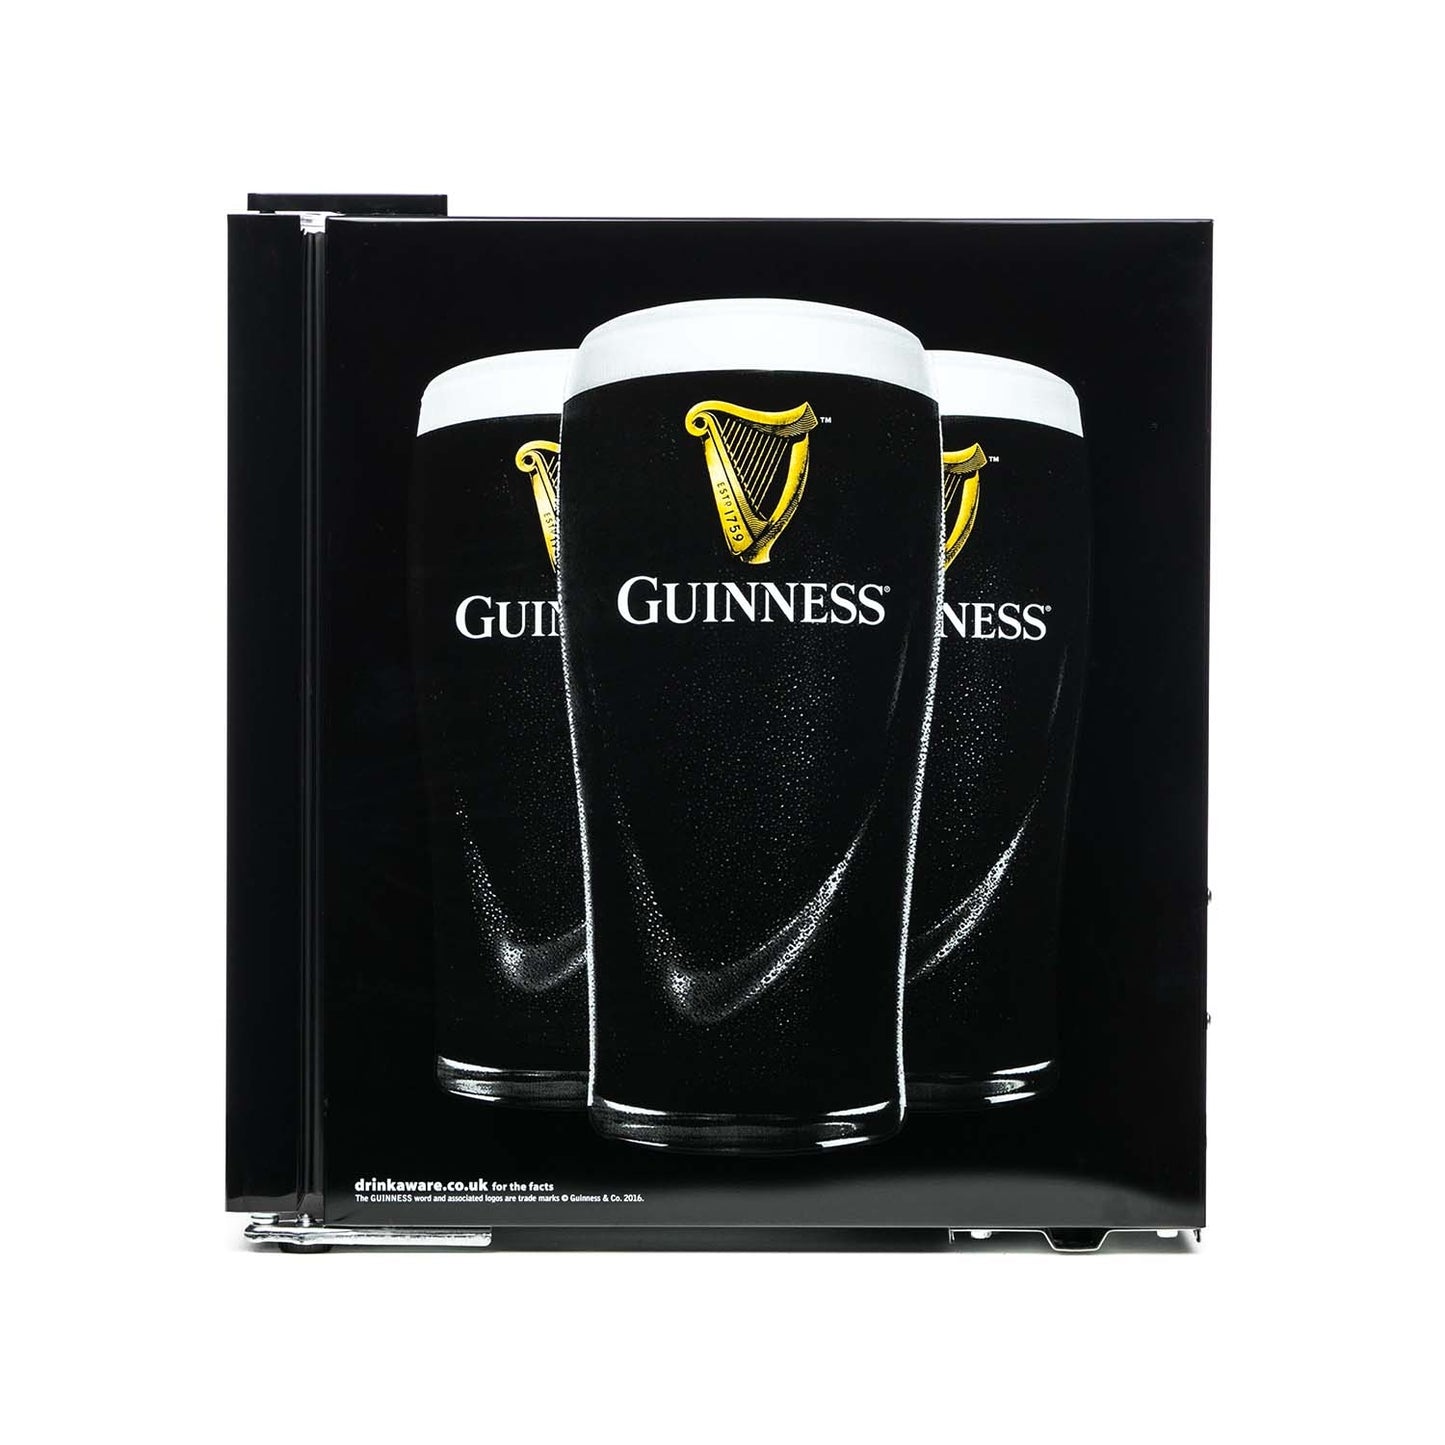 Guinness Beer Guinness Fridge with two iconic stout glasses, ensuring your brews stay chilled.